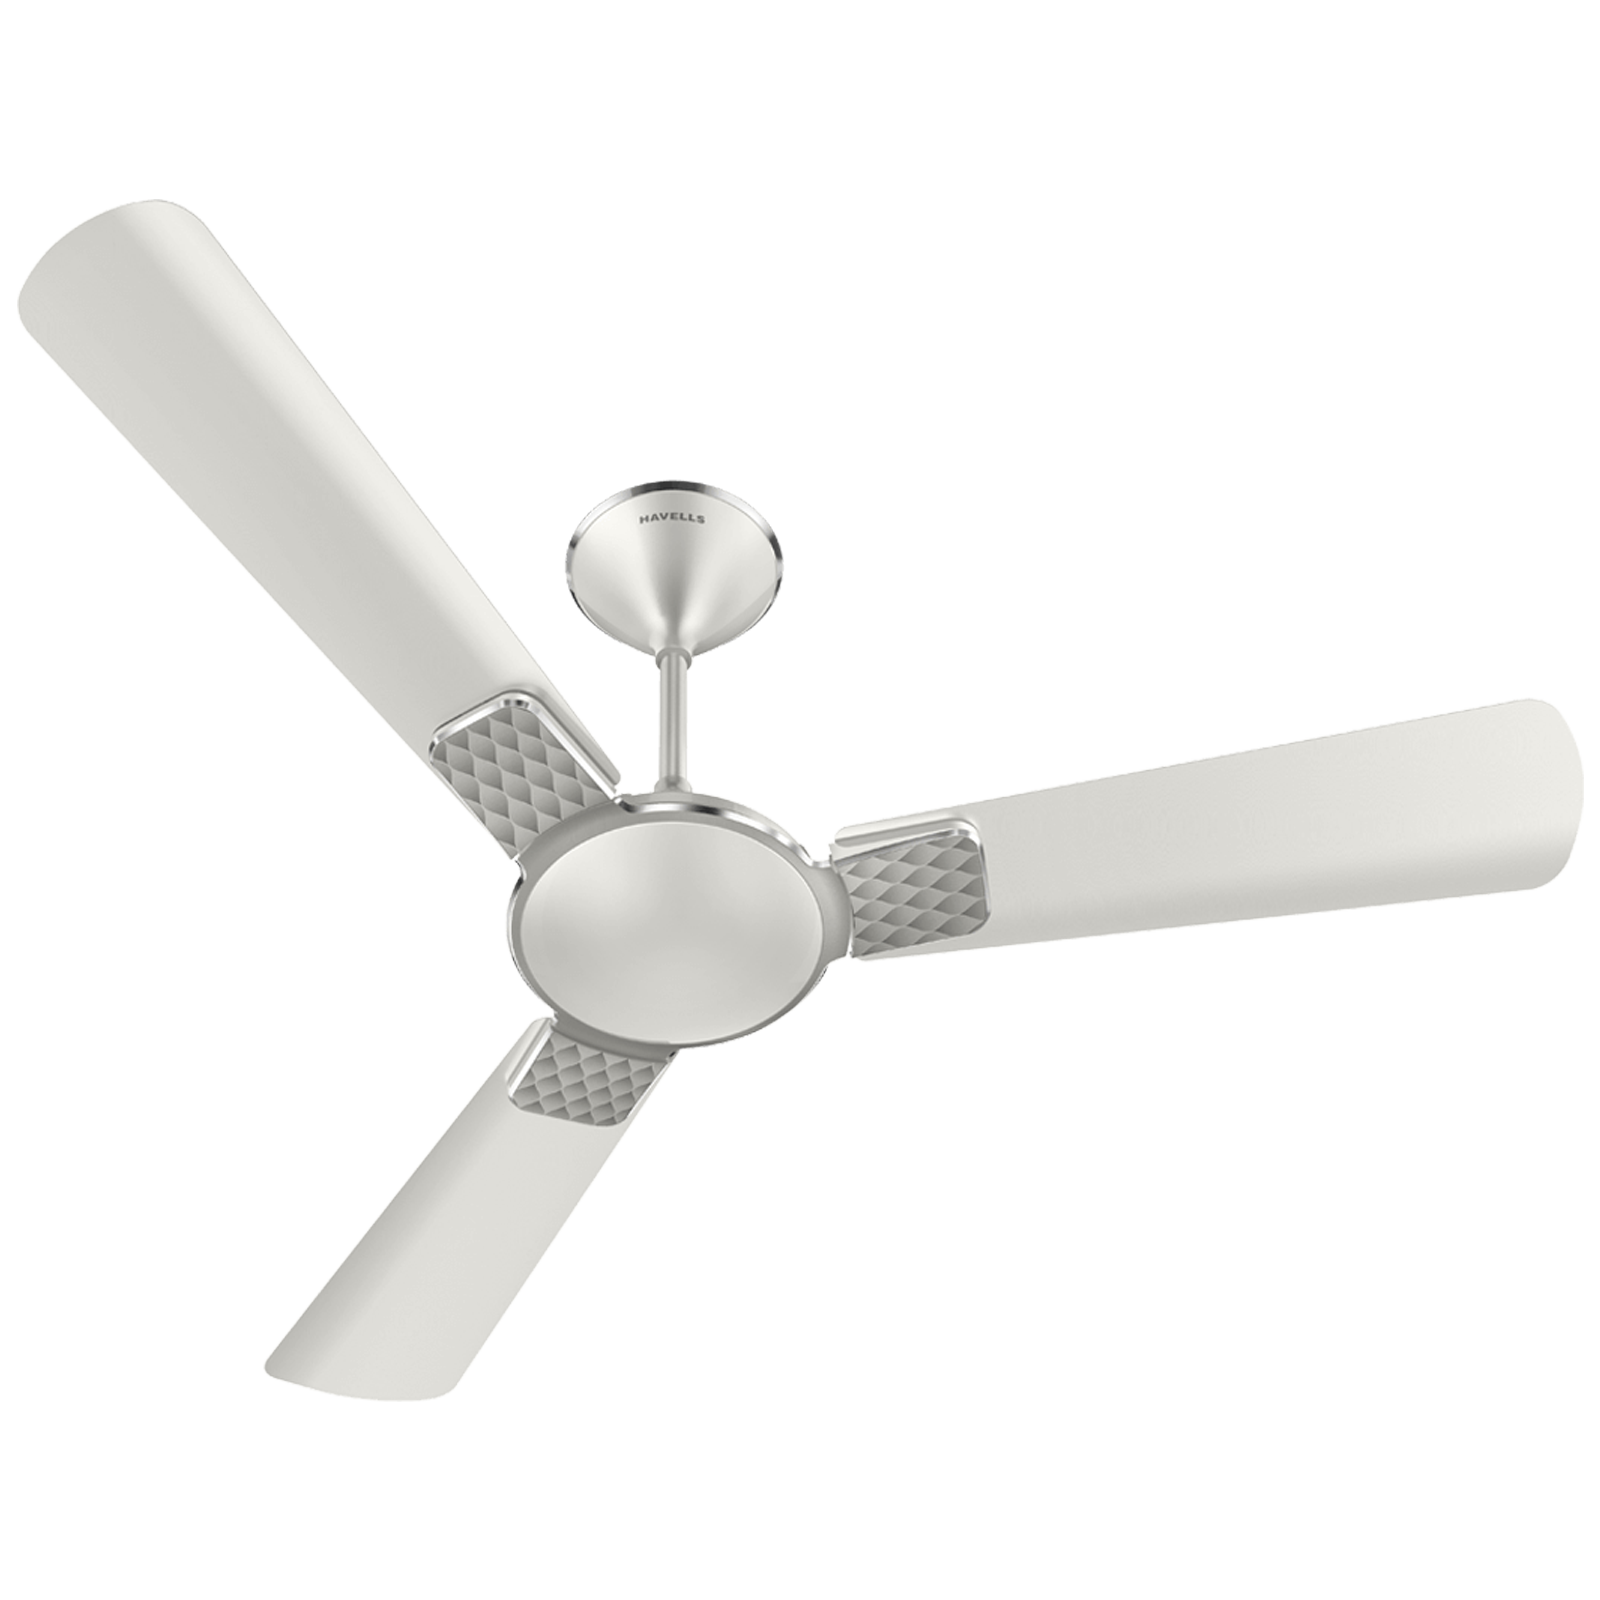 Havells Enticer BLDC 120cm Sweep 3 Blade Ceiling Fan (Copper Motor, FHCEG5SPWH48, Pearl White)